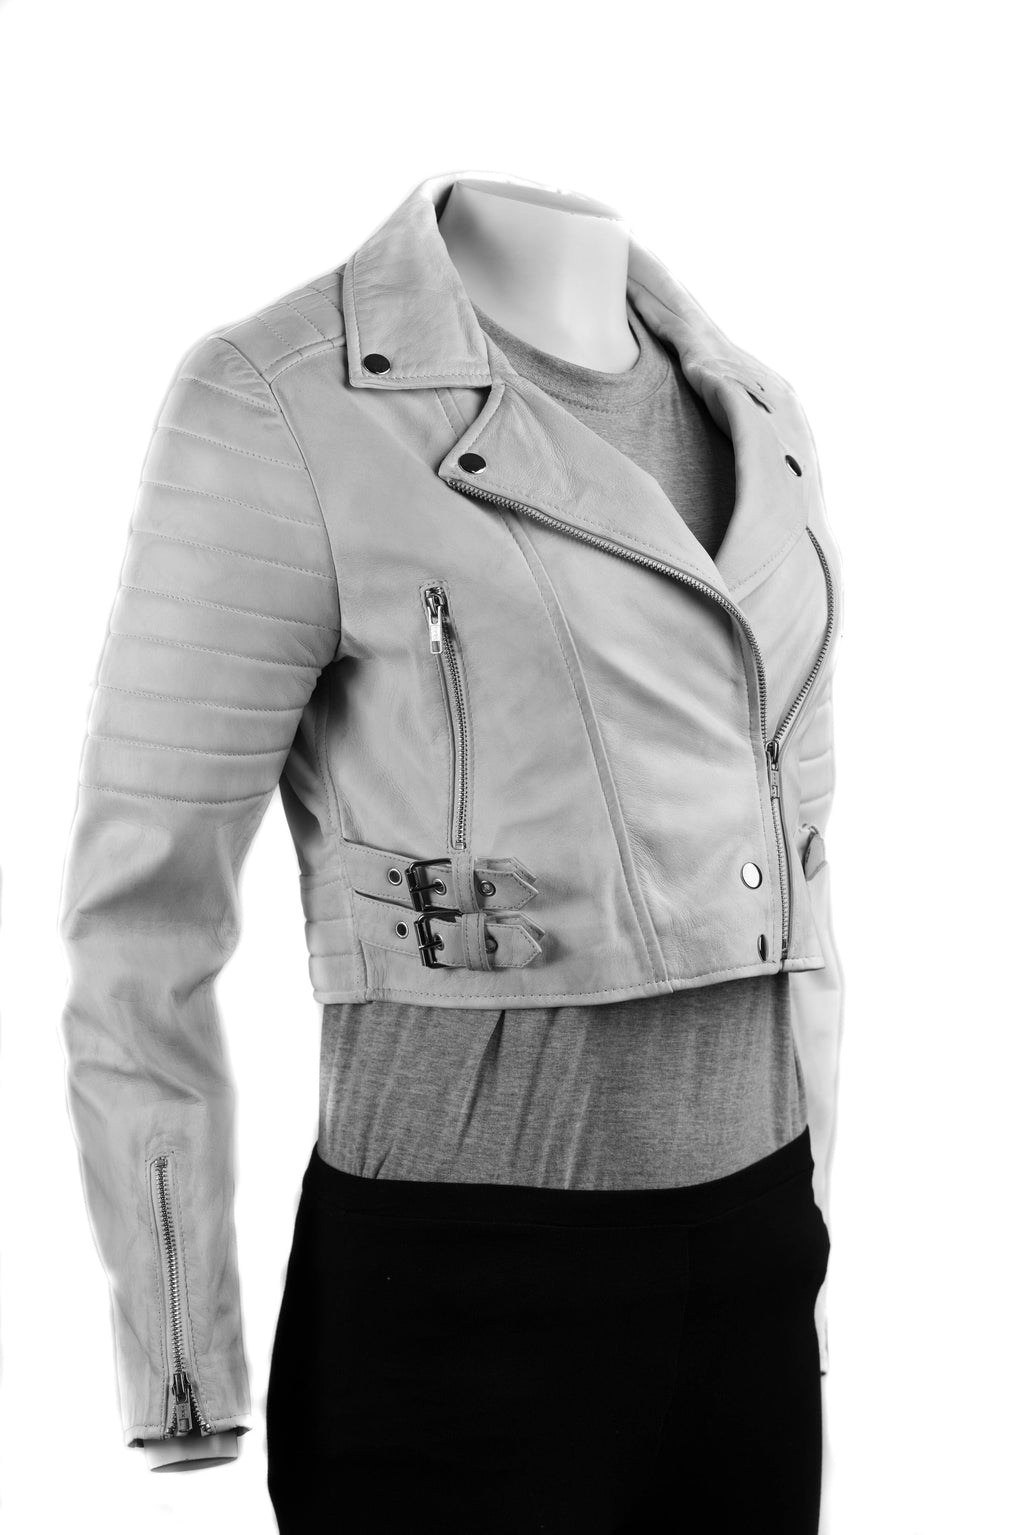 Ladies Antique White Cropped Leather Biker Style Jacket: Concetta